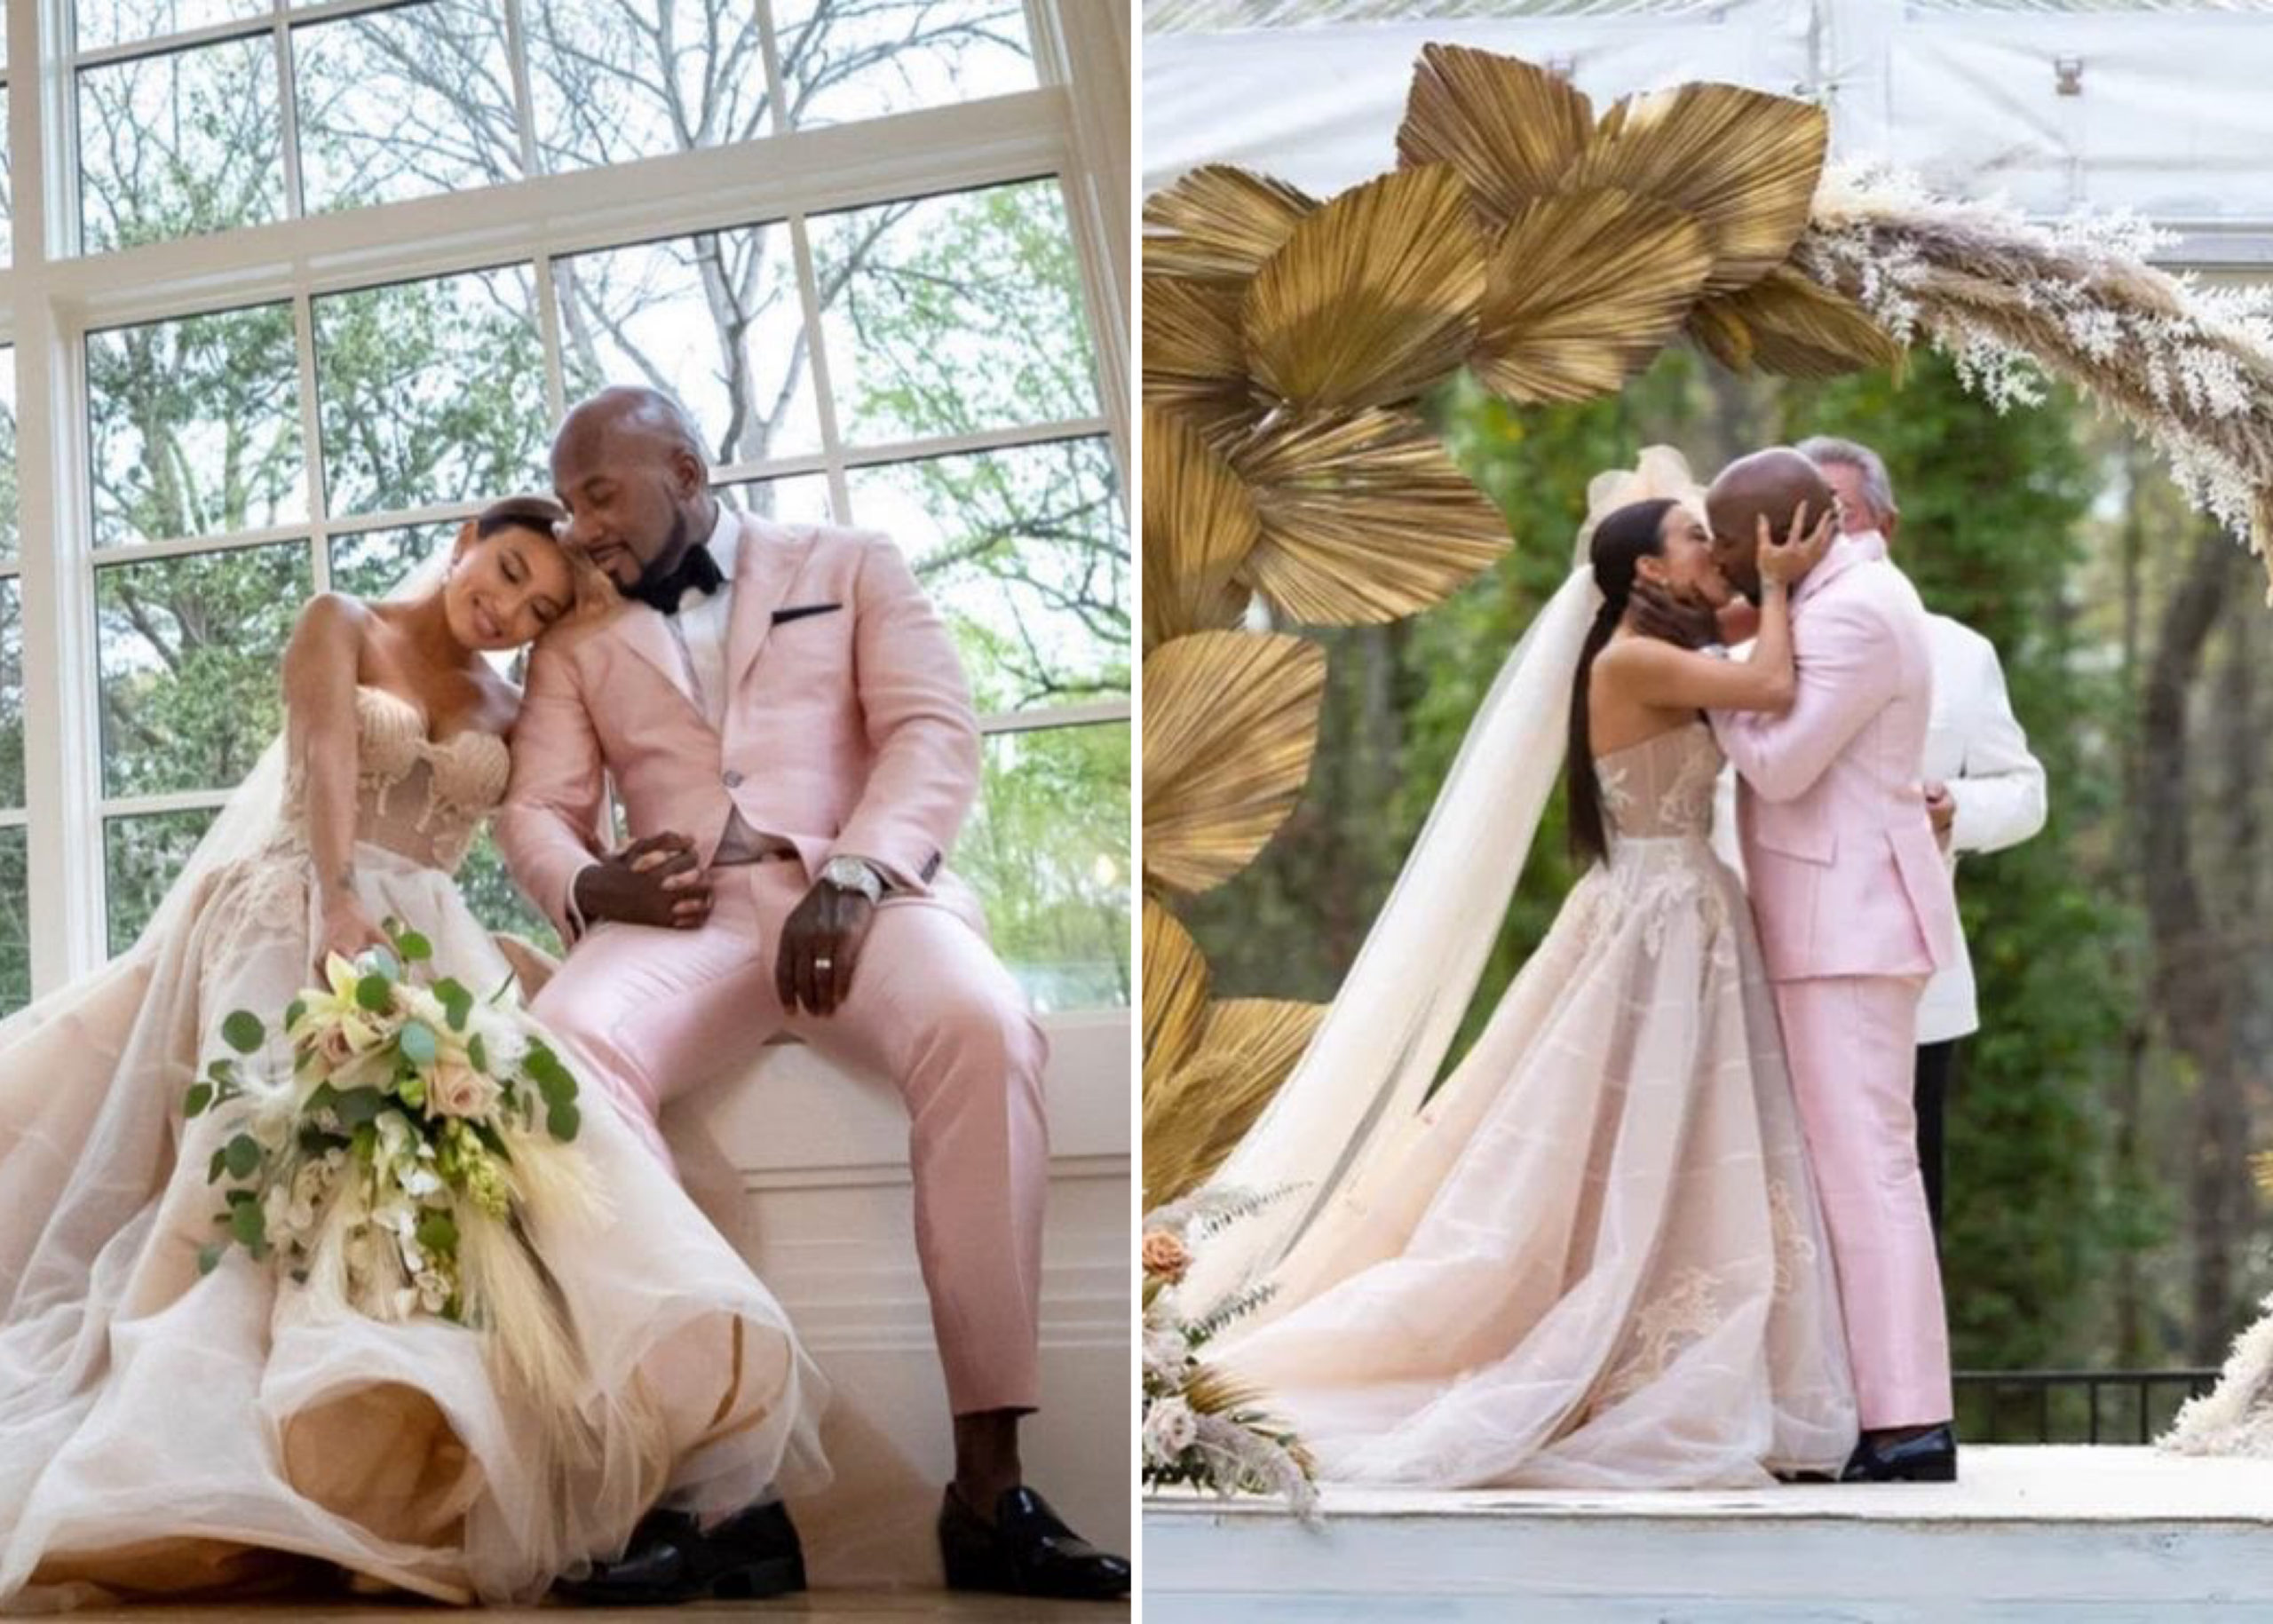 Rapper Jeezy And ‘The Real’ Talk Show Host, Jeannie Mai Get Married